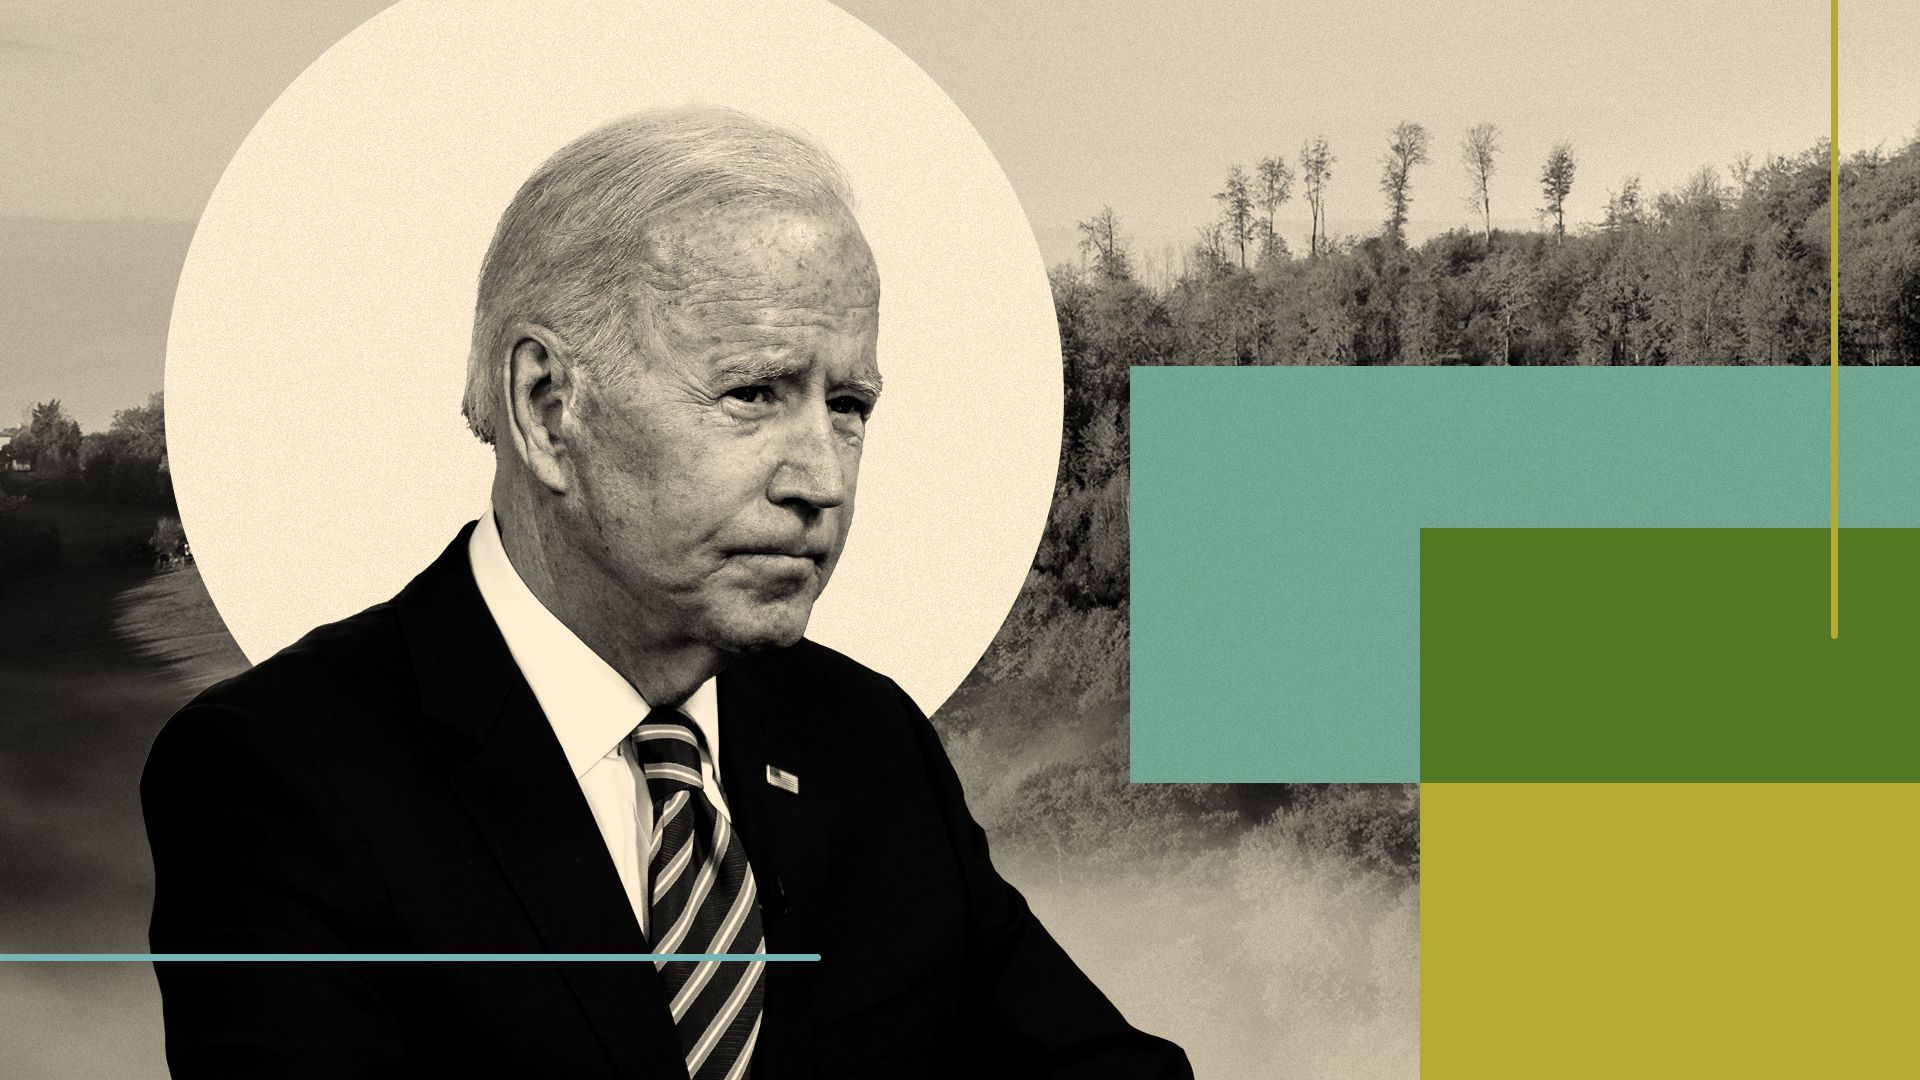 Photo illustration of President Biden surrounded by various shapes and a forest in the background